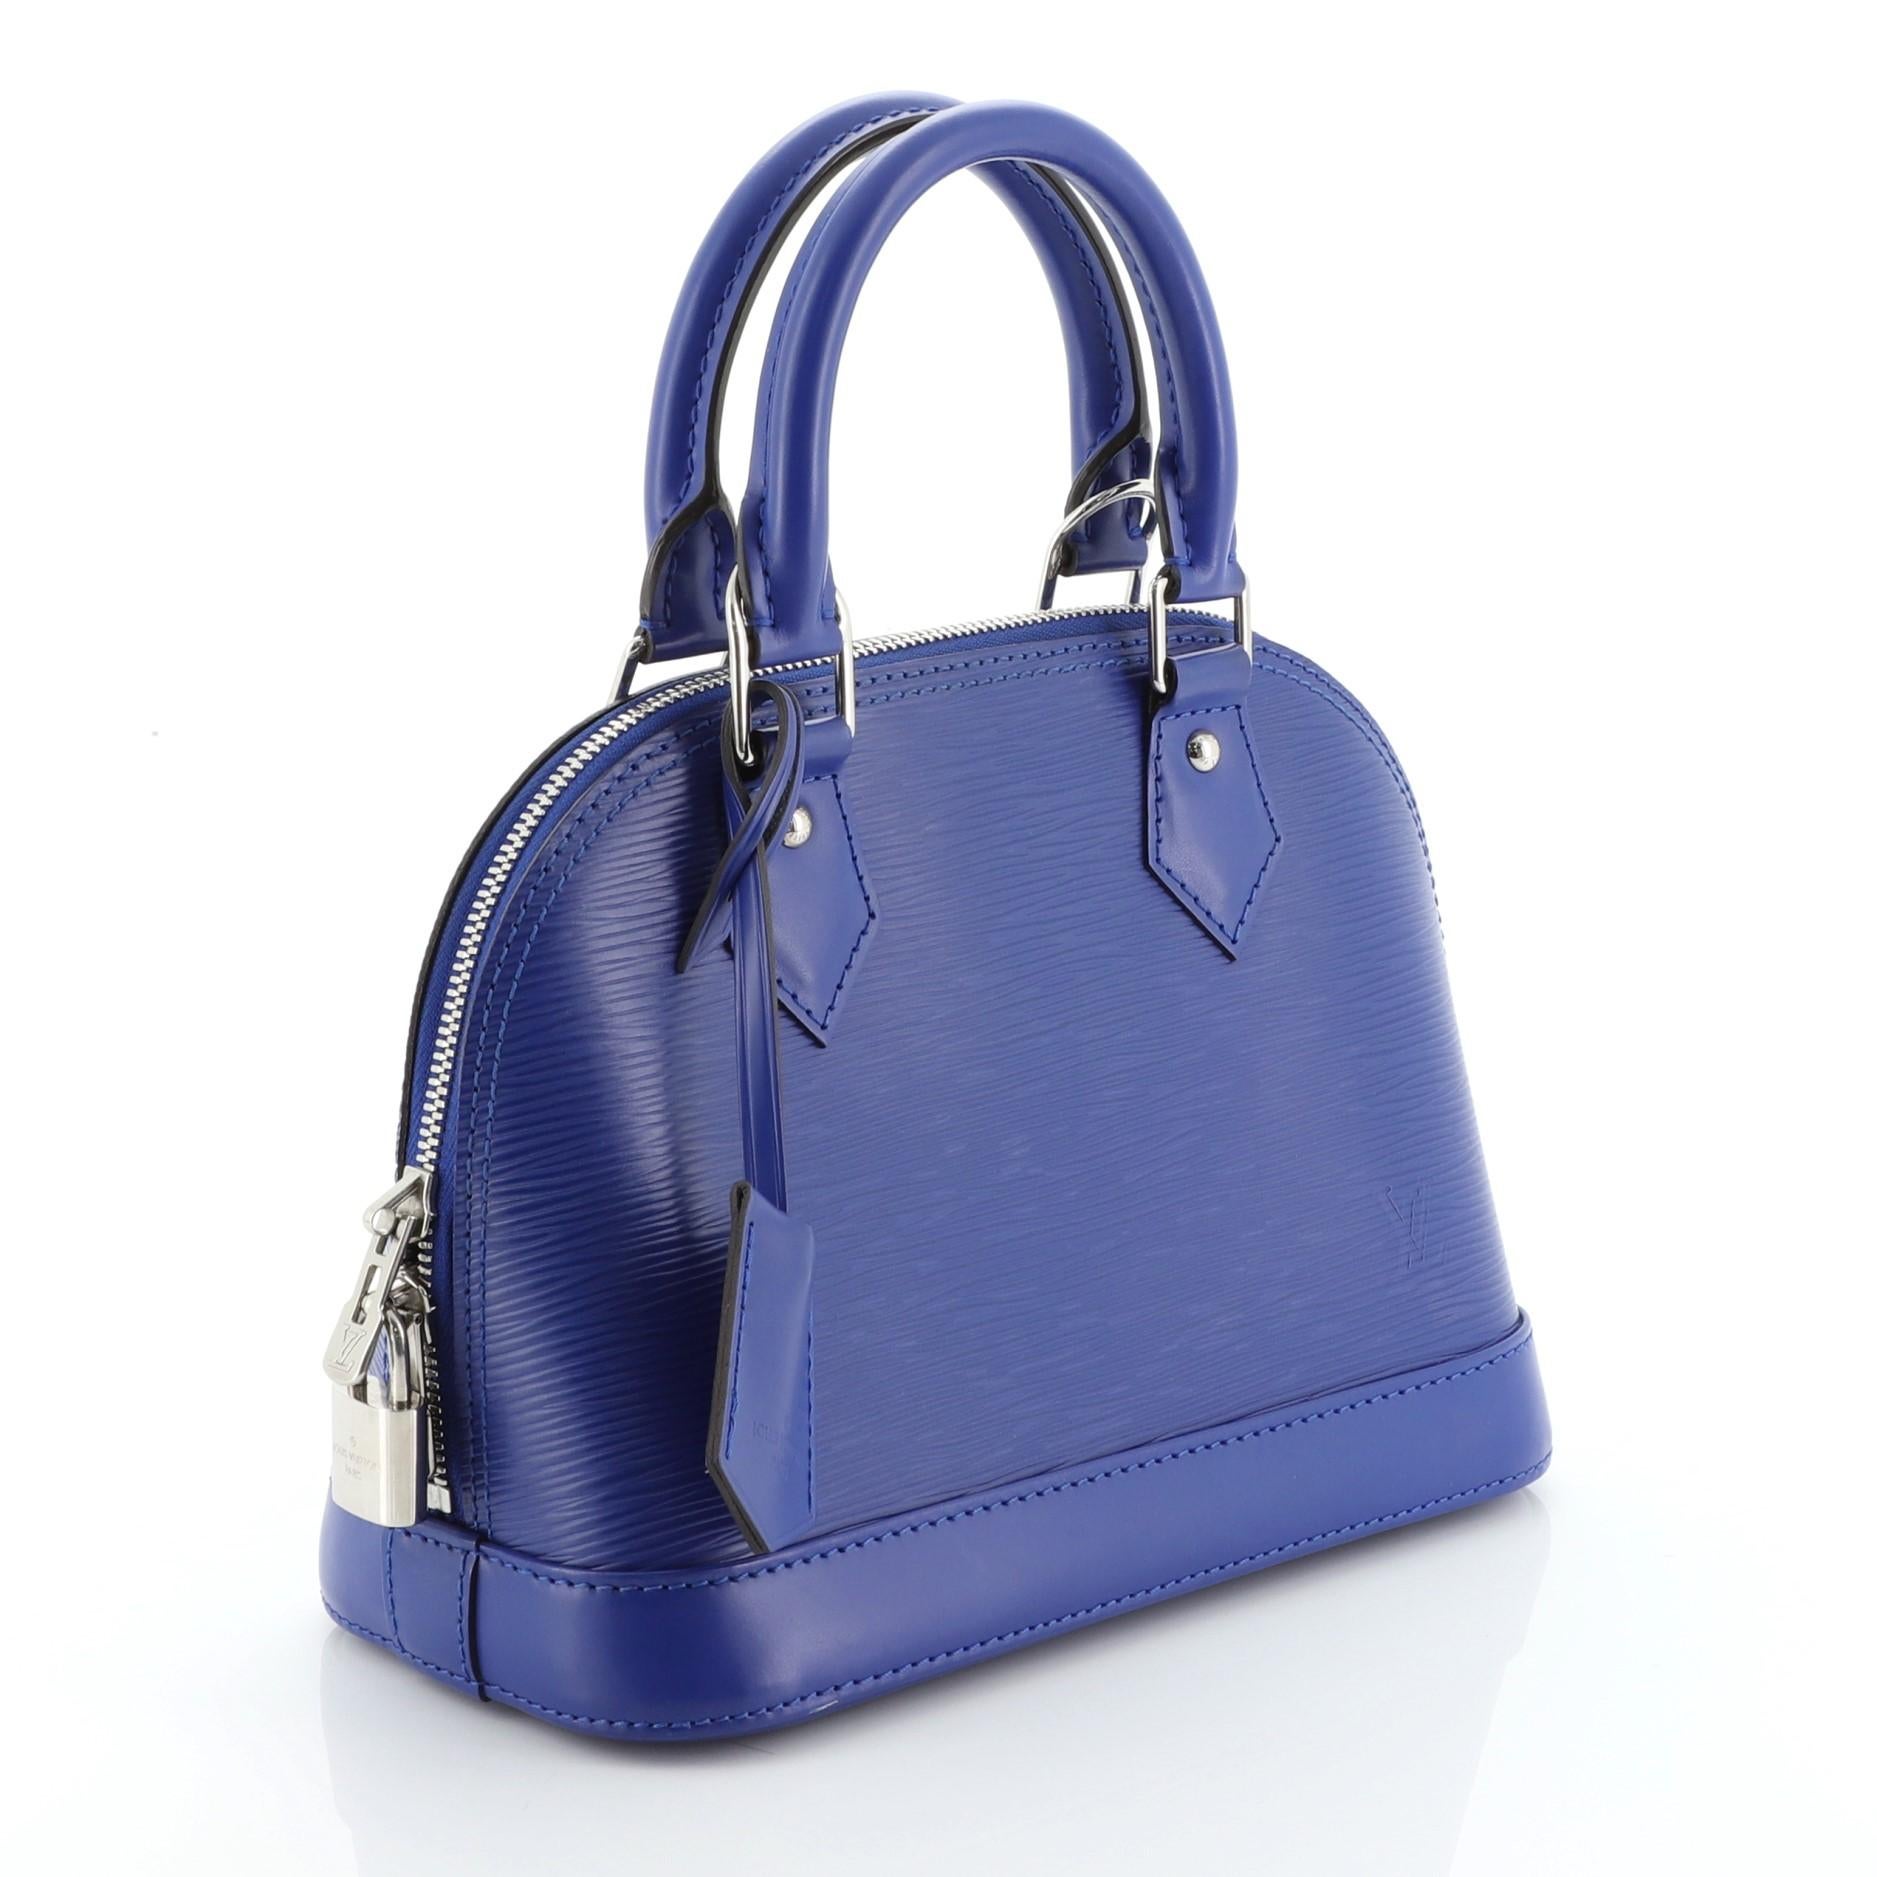 This Louis Vuitton Alma Handbag Epi Leather BB is a classic piece named after Alma Bridge, a span that connects two Parisian neighborhoods. Crafted in blue epi leather, it features dual rolled leather handles and silver-tone hardware. Its all-around